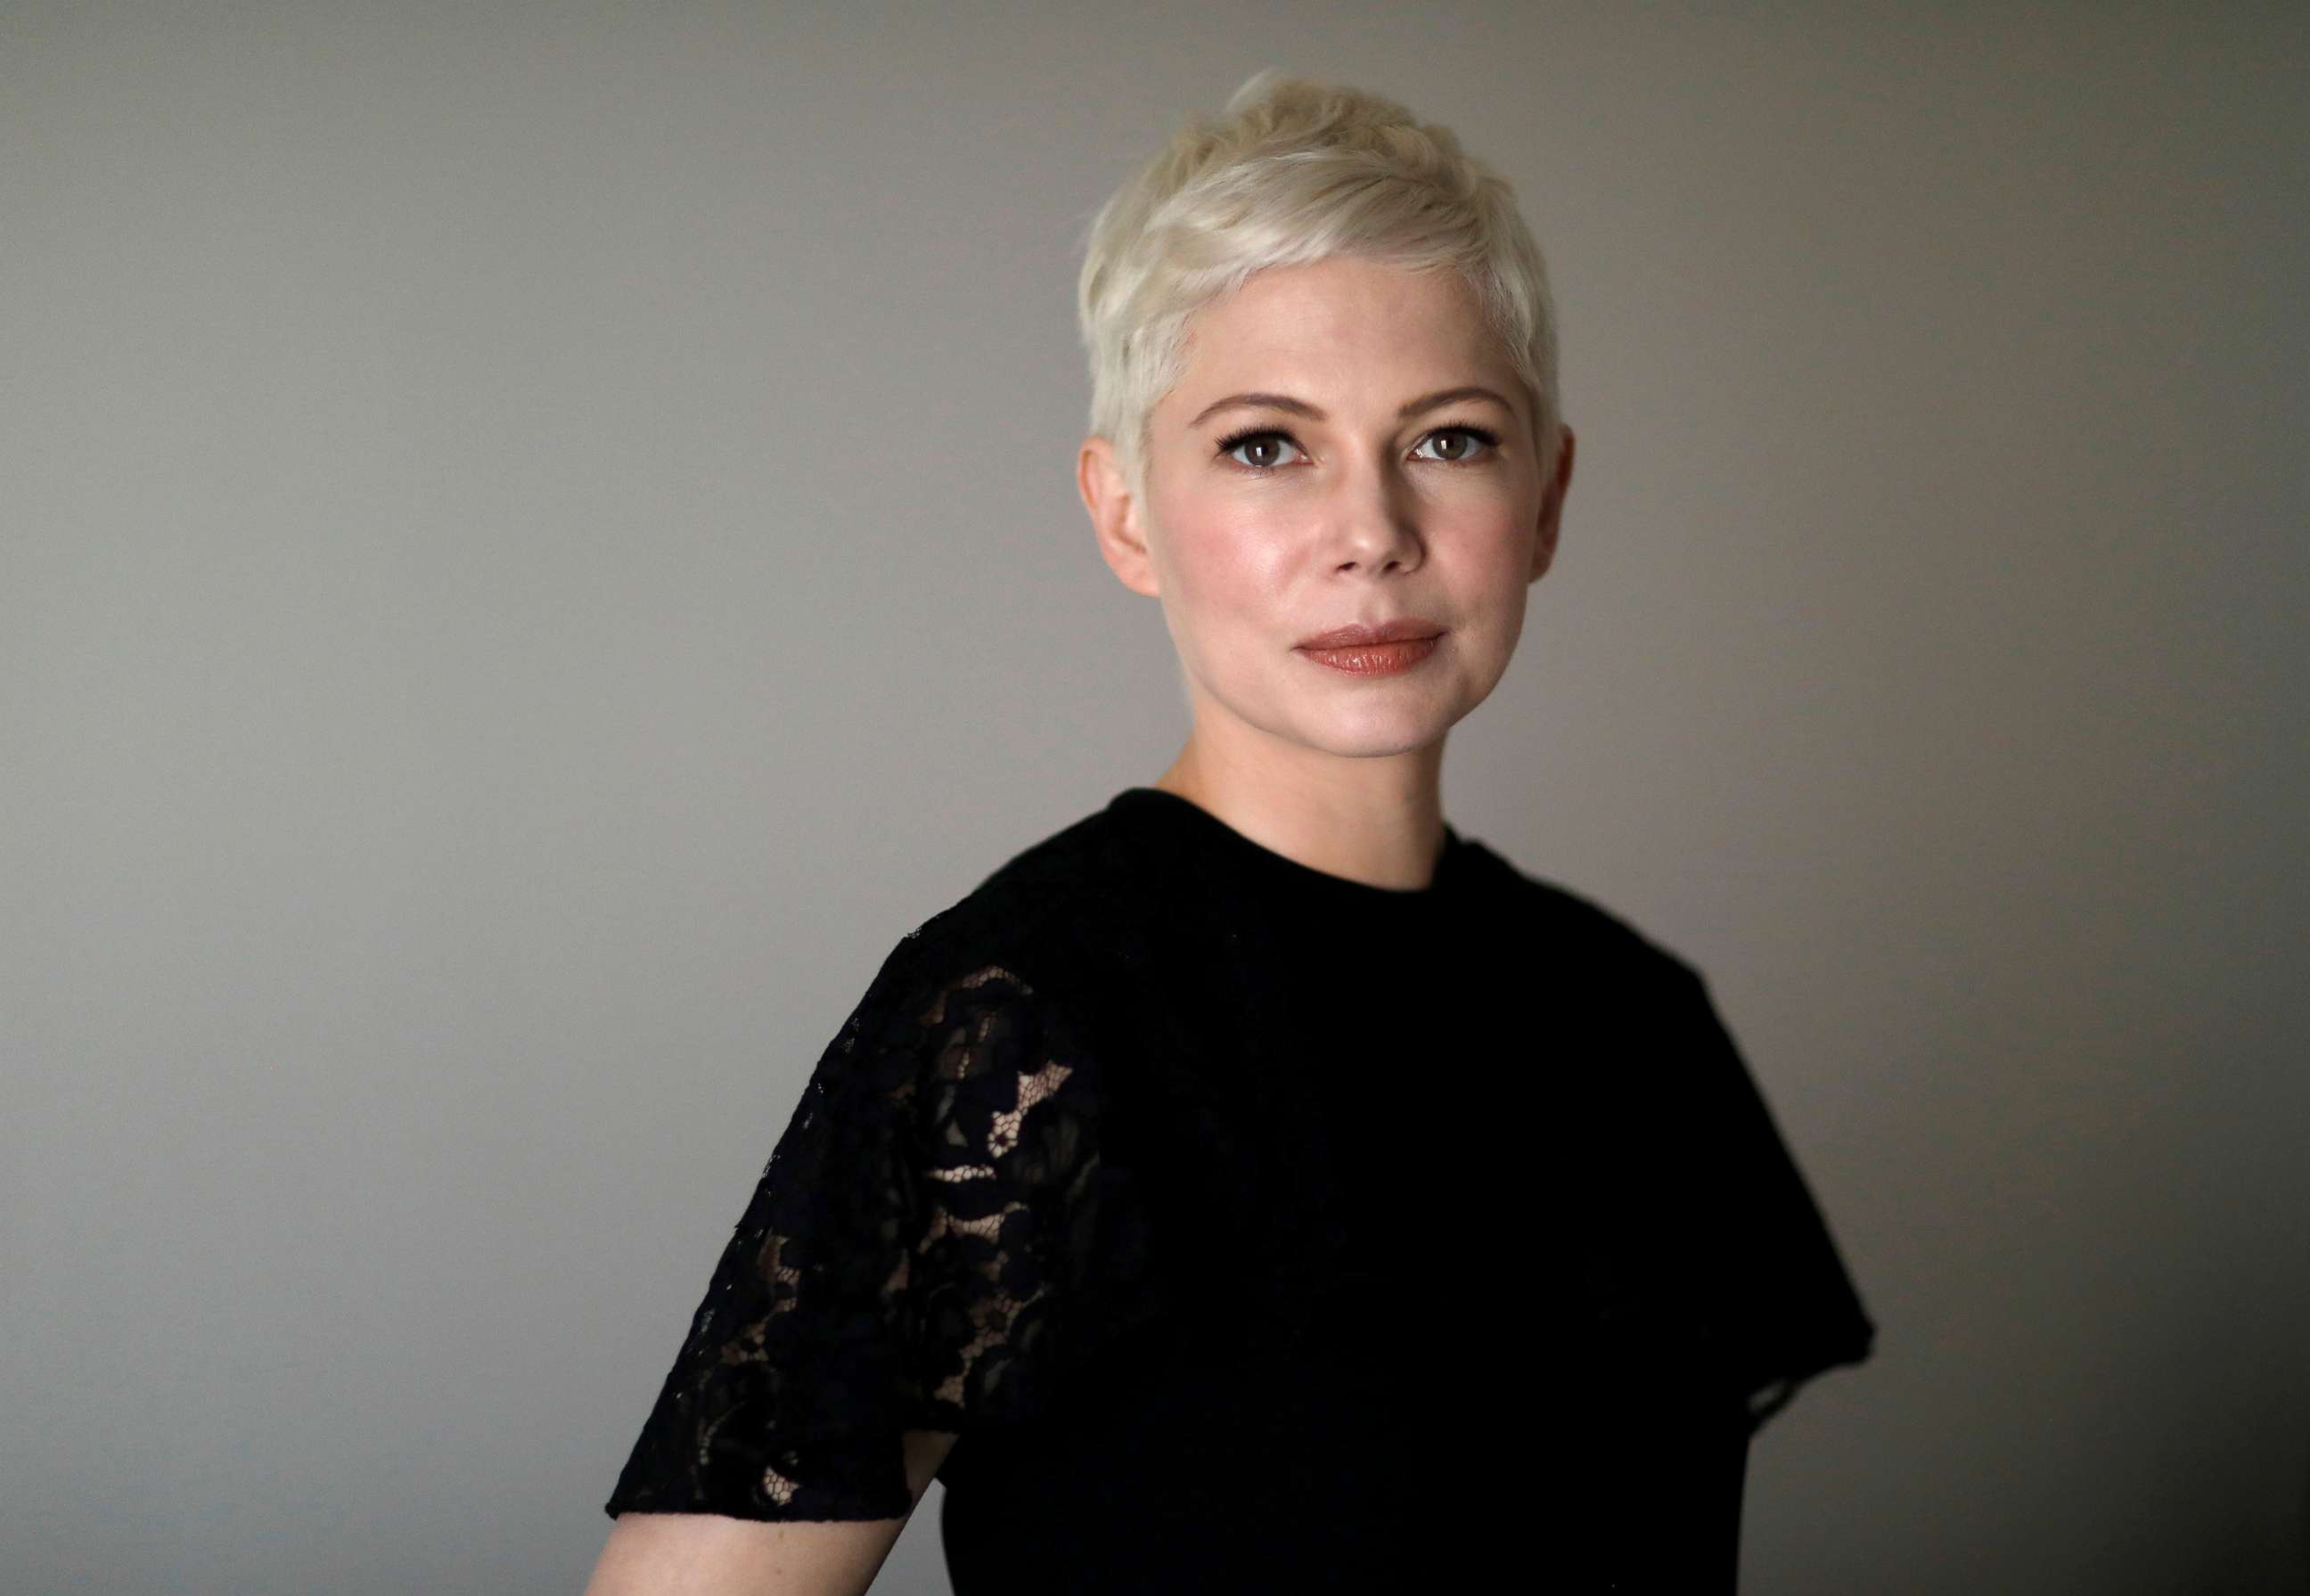 PHOTO: Michelle Williams poses for a portrait while promoting the movie "All the Money in the World" in Los Angeles, Dec. 16, 2017.